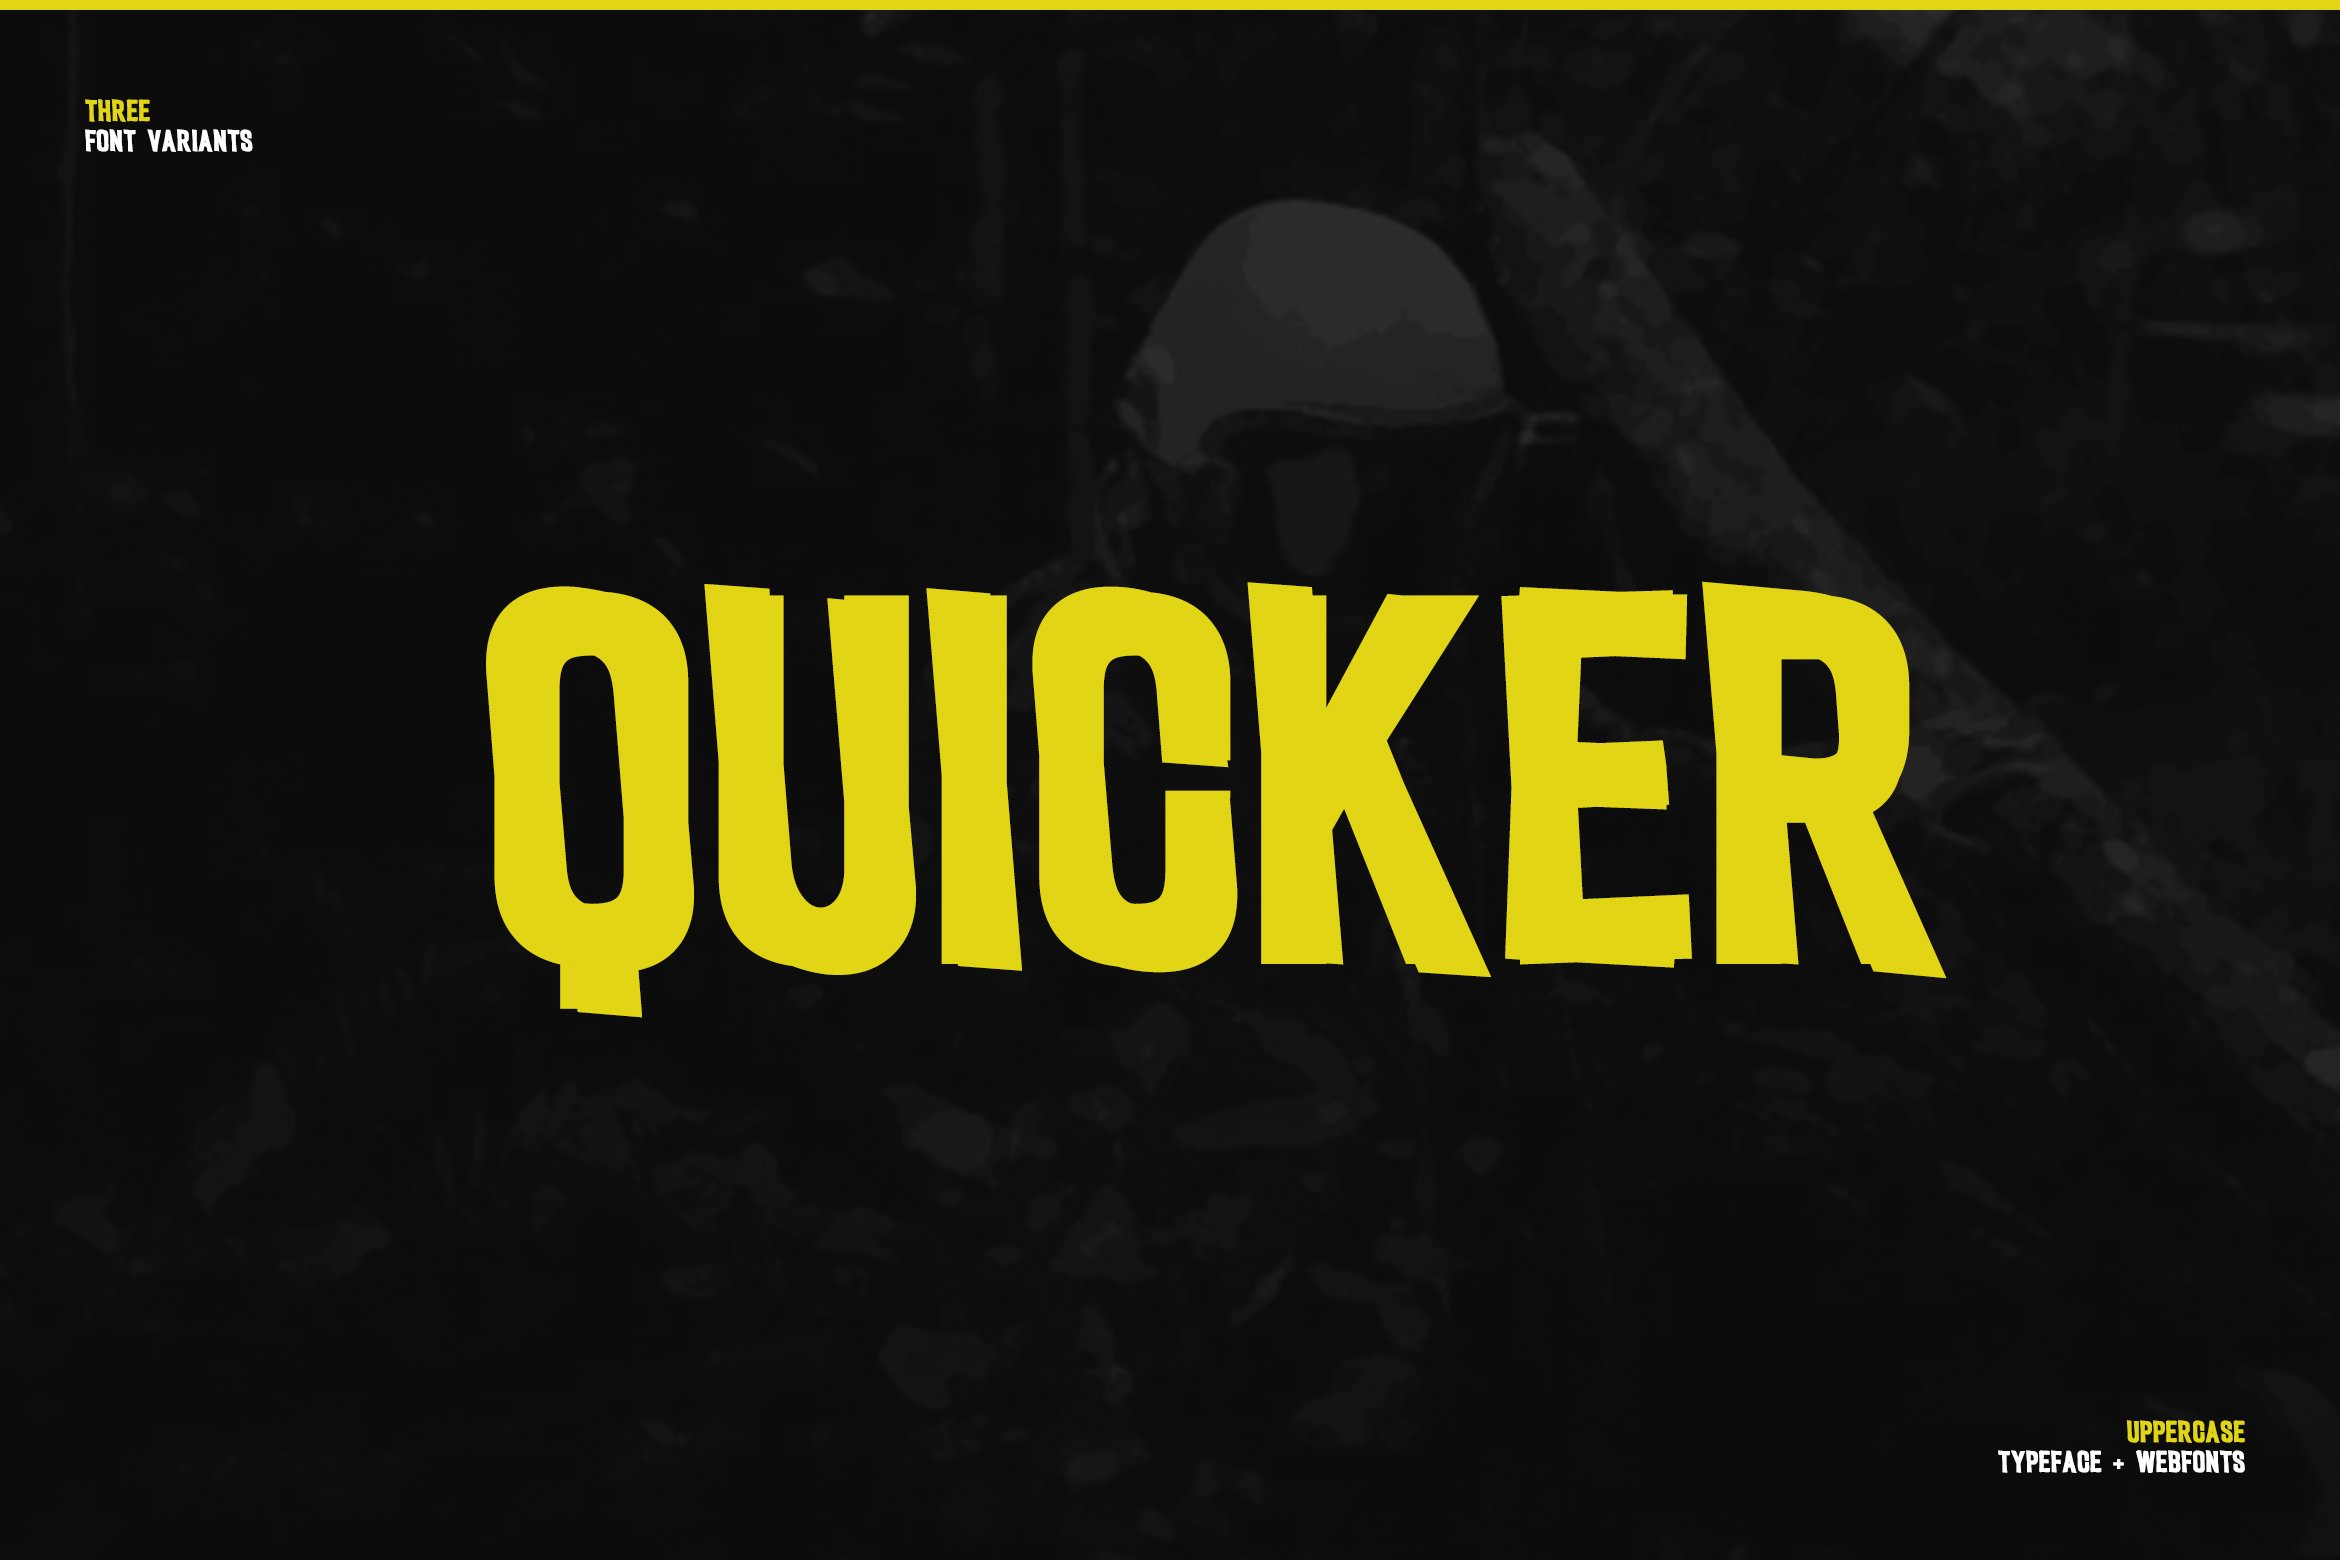 Quicker Modern Business Font cover image.